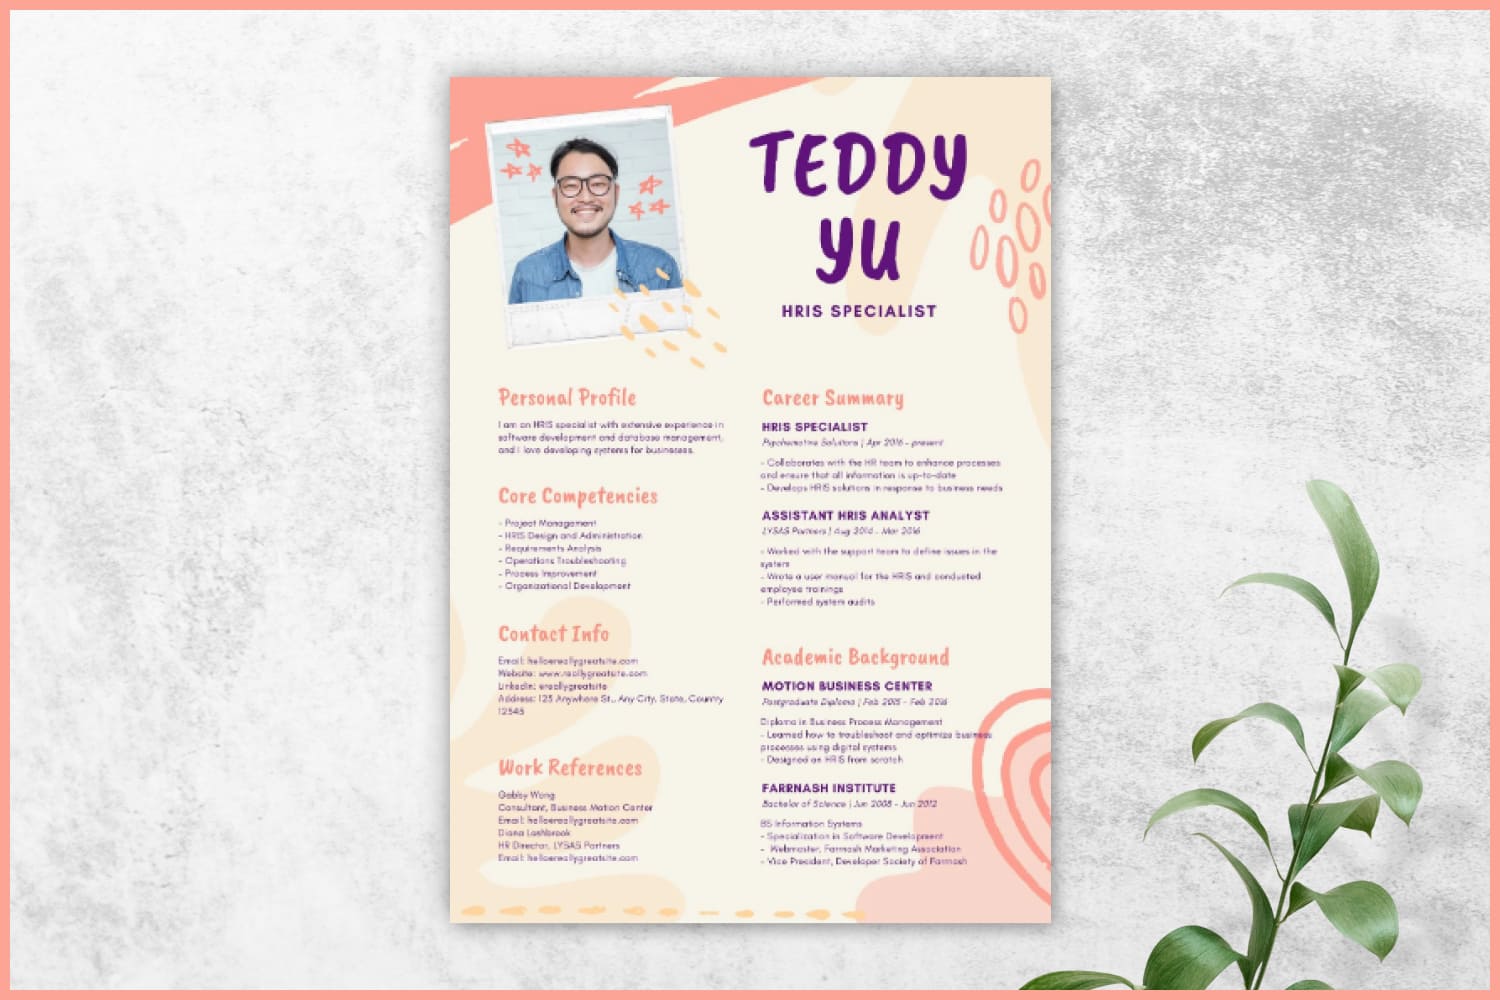 Resume in a cheerful style with a multi-colored backing.